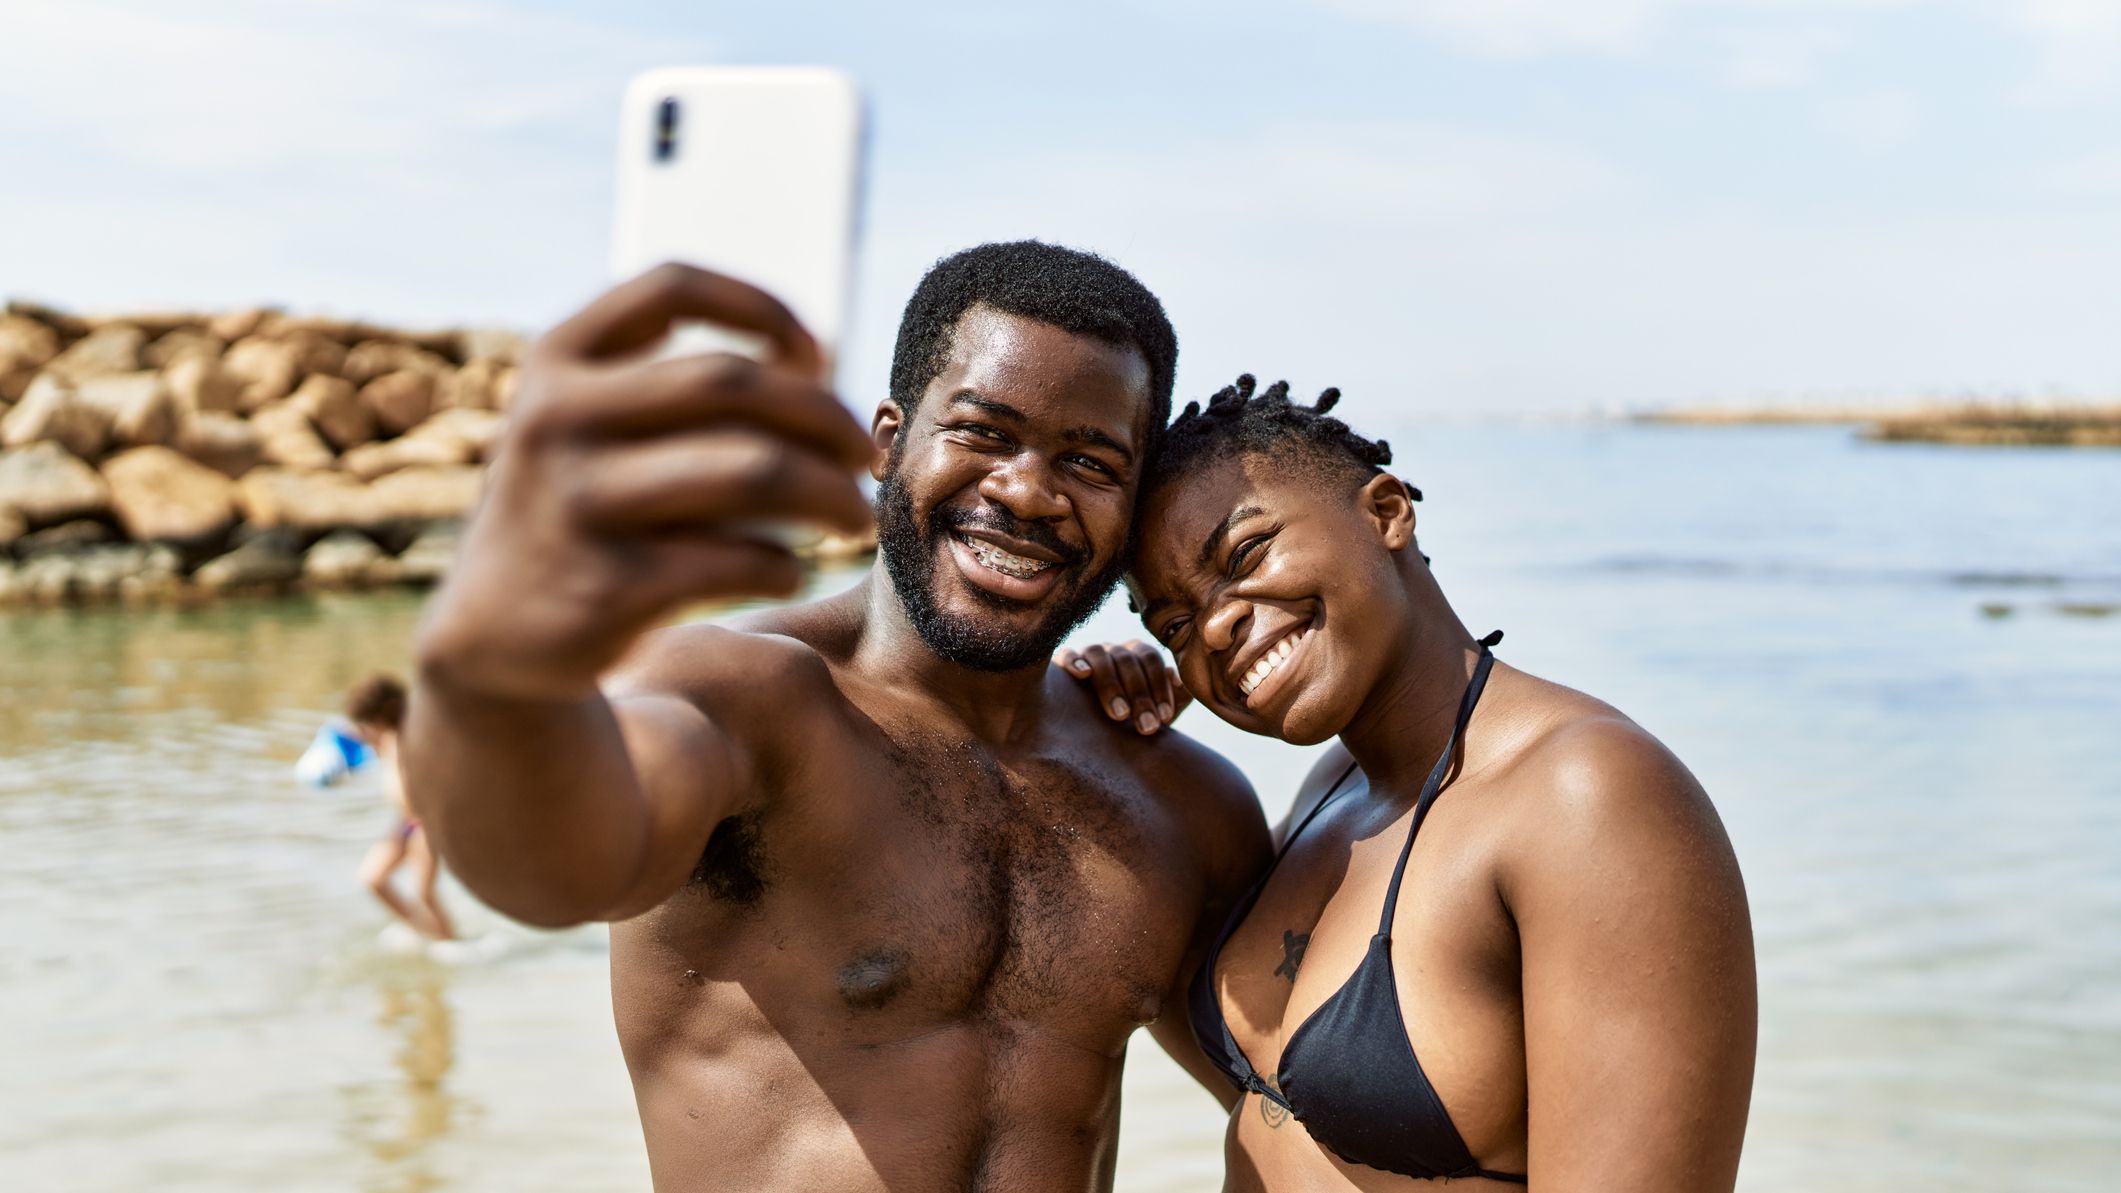 https://hips.hearstapps.com/hmg-prod/images/young-african-american-tourist-couple-wearing-royalty-free-image-1682363274.jpg?crop=1xw:0.84355xh;center,top